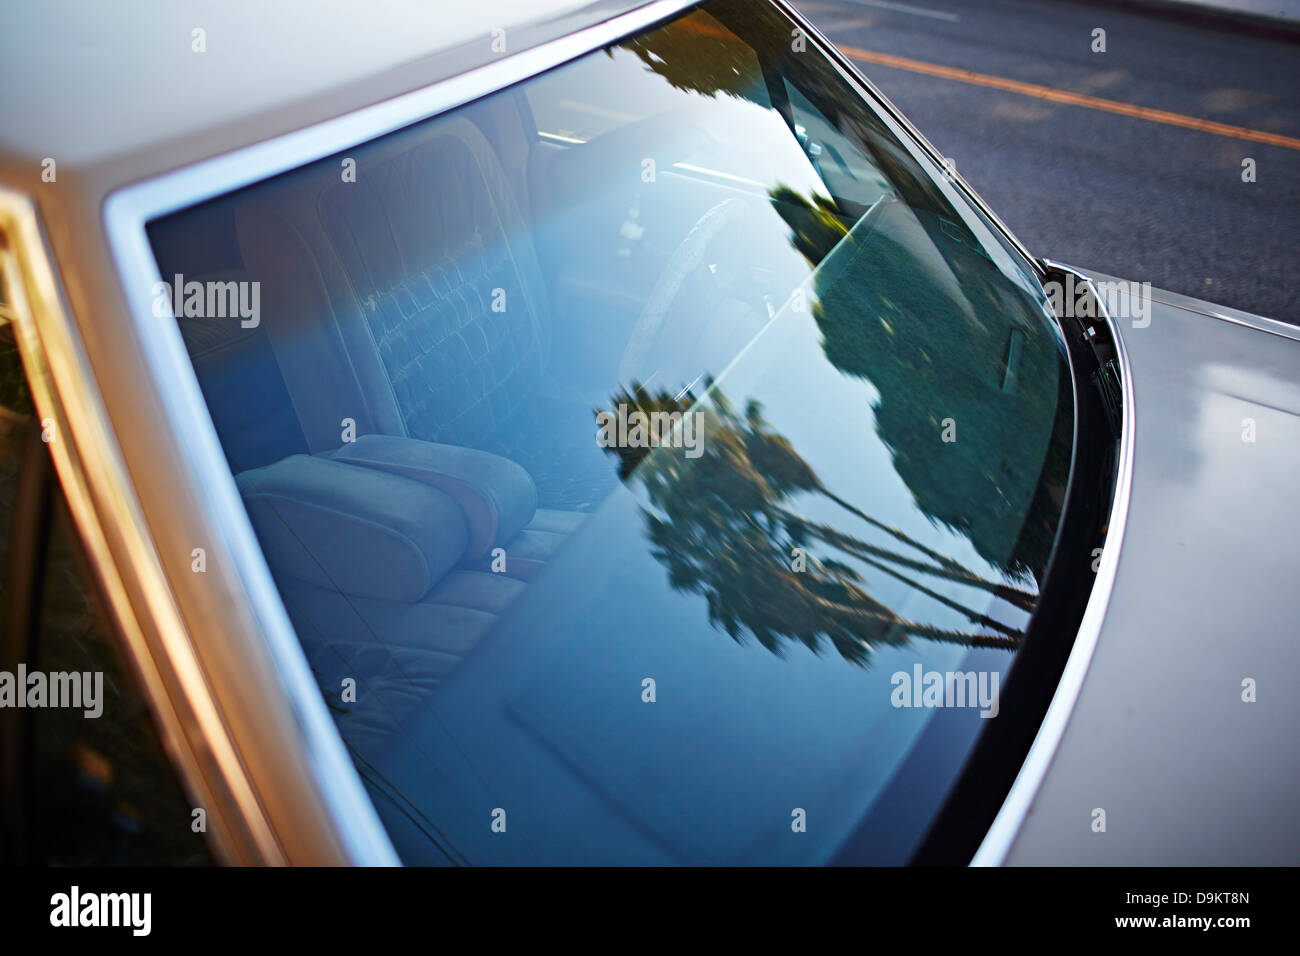 Reflection of Seasonal Trees in the Car Window Stock Photo - Image of  colors, branches: 65803250